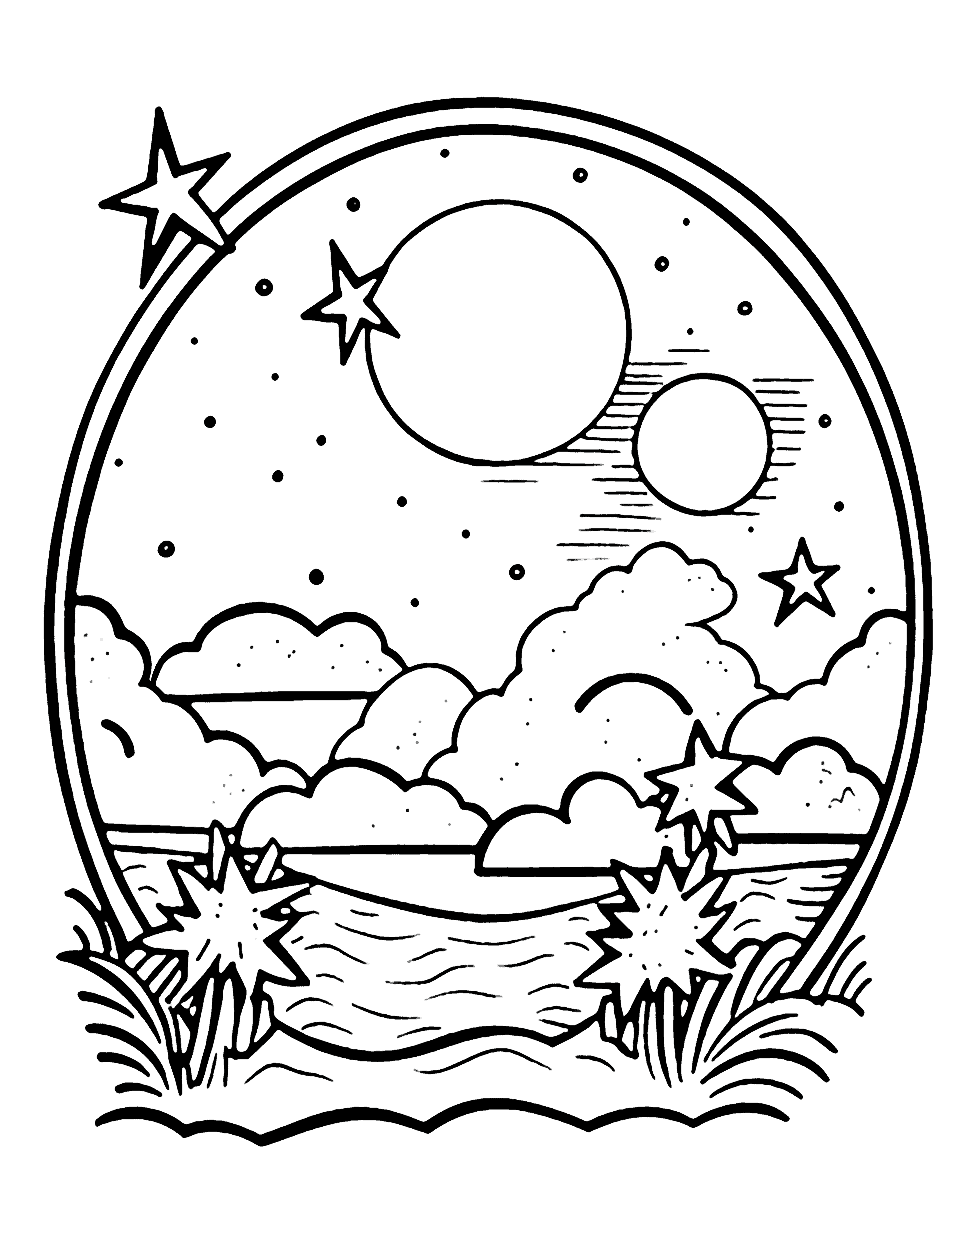 Summer Night Sky Coloring Page - A detailed coloring page of a summer night sky filled with stars, constellations, and a moon.